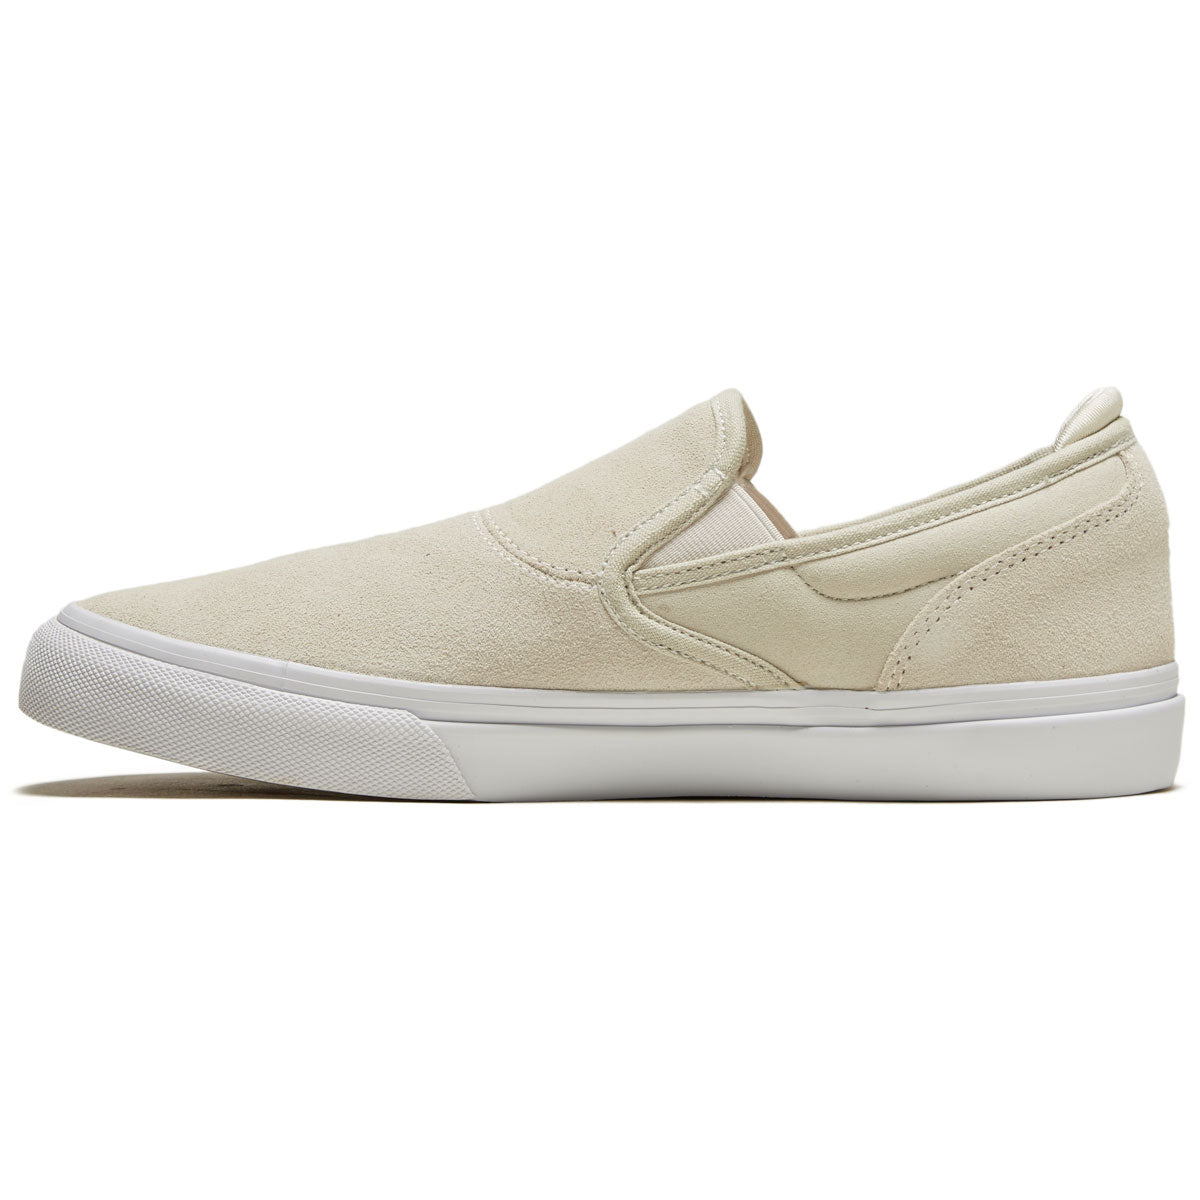 Emerica Wino G6 Slip-on This Is Skateboarding Shoes - White image 2